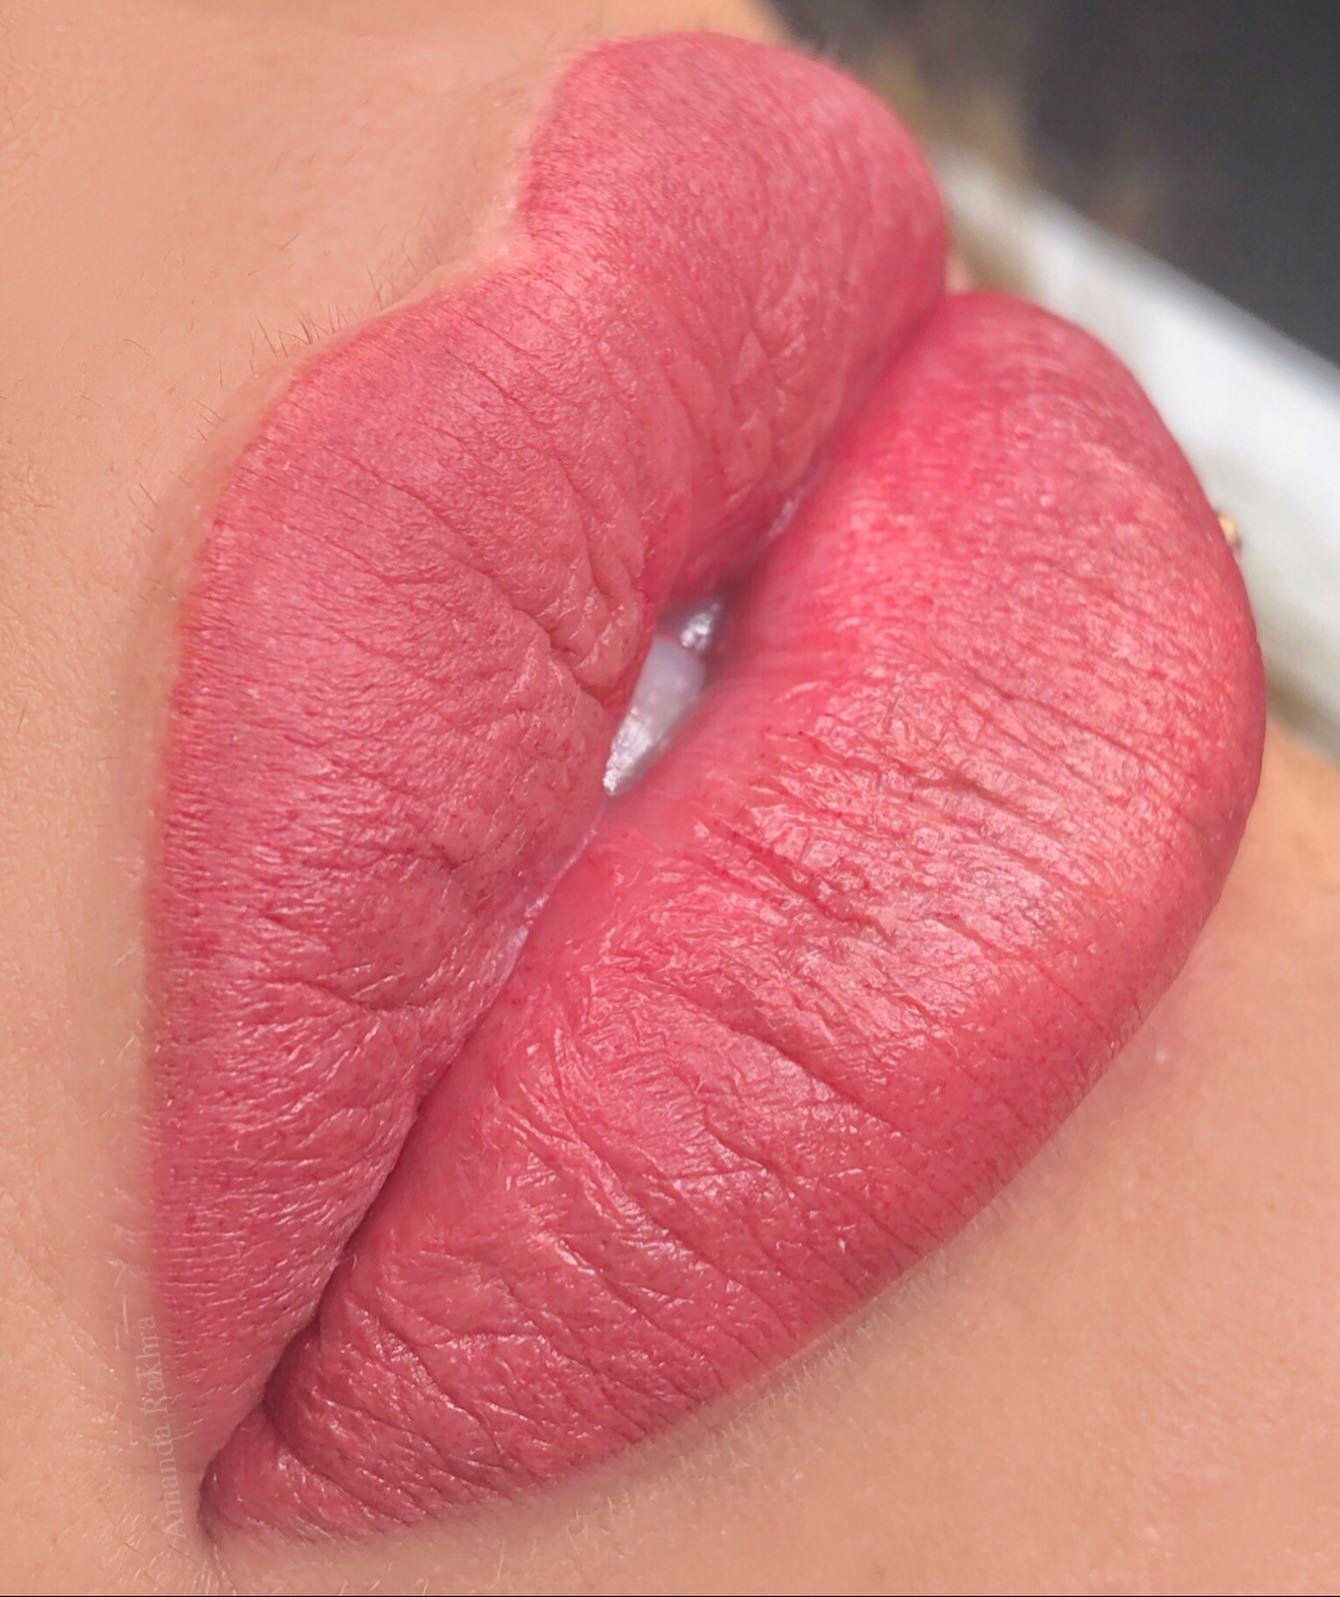 CLOSE UP 📷 

👄𝐋𝐈𝐏 𝐁𝐋𝐔𝐒𝐇 𝐓𝐑𝐀𝐈𝐍𝐈𝐍𝐆👄

At @artpmustudio @artbyamandarakhra will be the head instructor for the integrative Lip Blush course. 

𝘎𝘙𝘖𝘜𝘗 𝘖𝘙 1:1 𝘊𝘖𝘜𝘙𝘚𝘌𝘚 are available - whether you work best in a group or 1:1. 